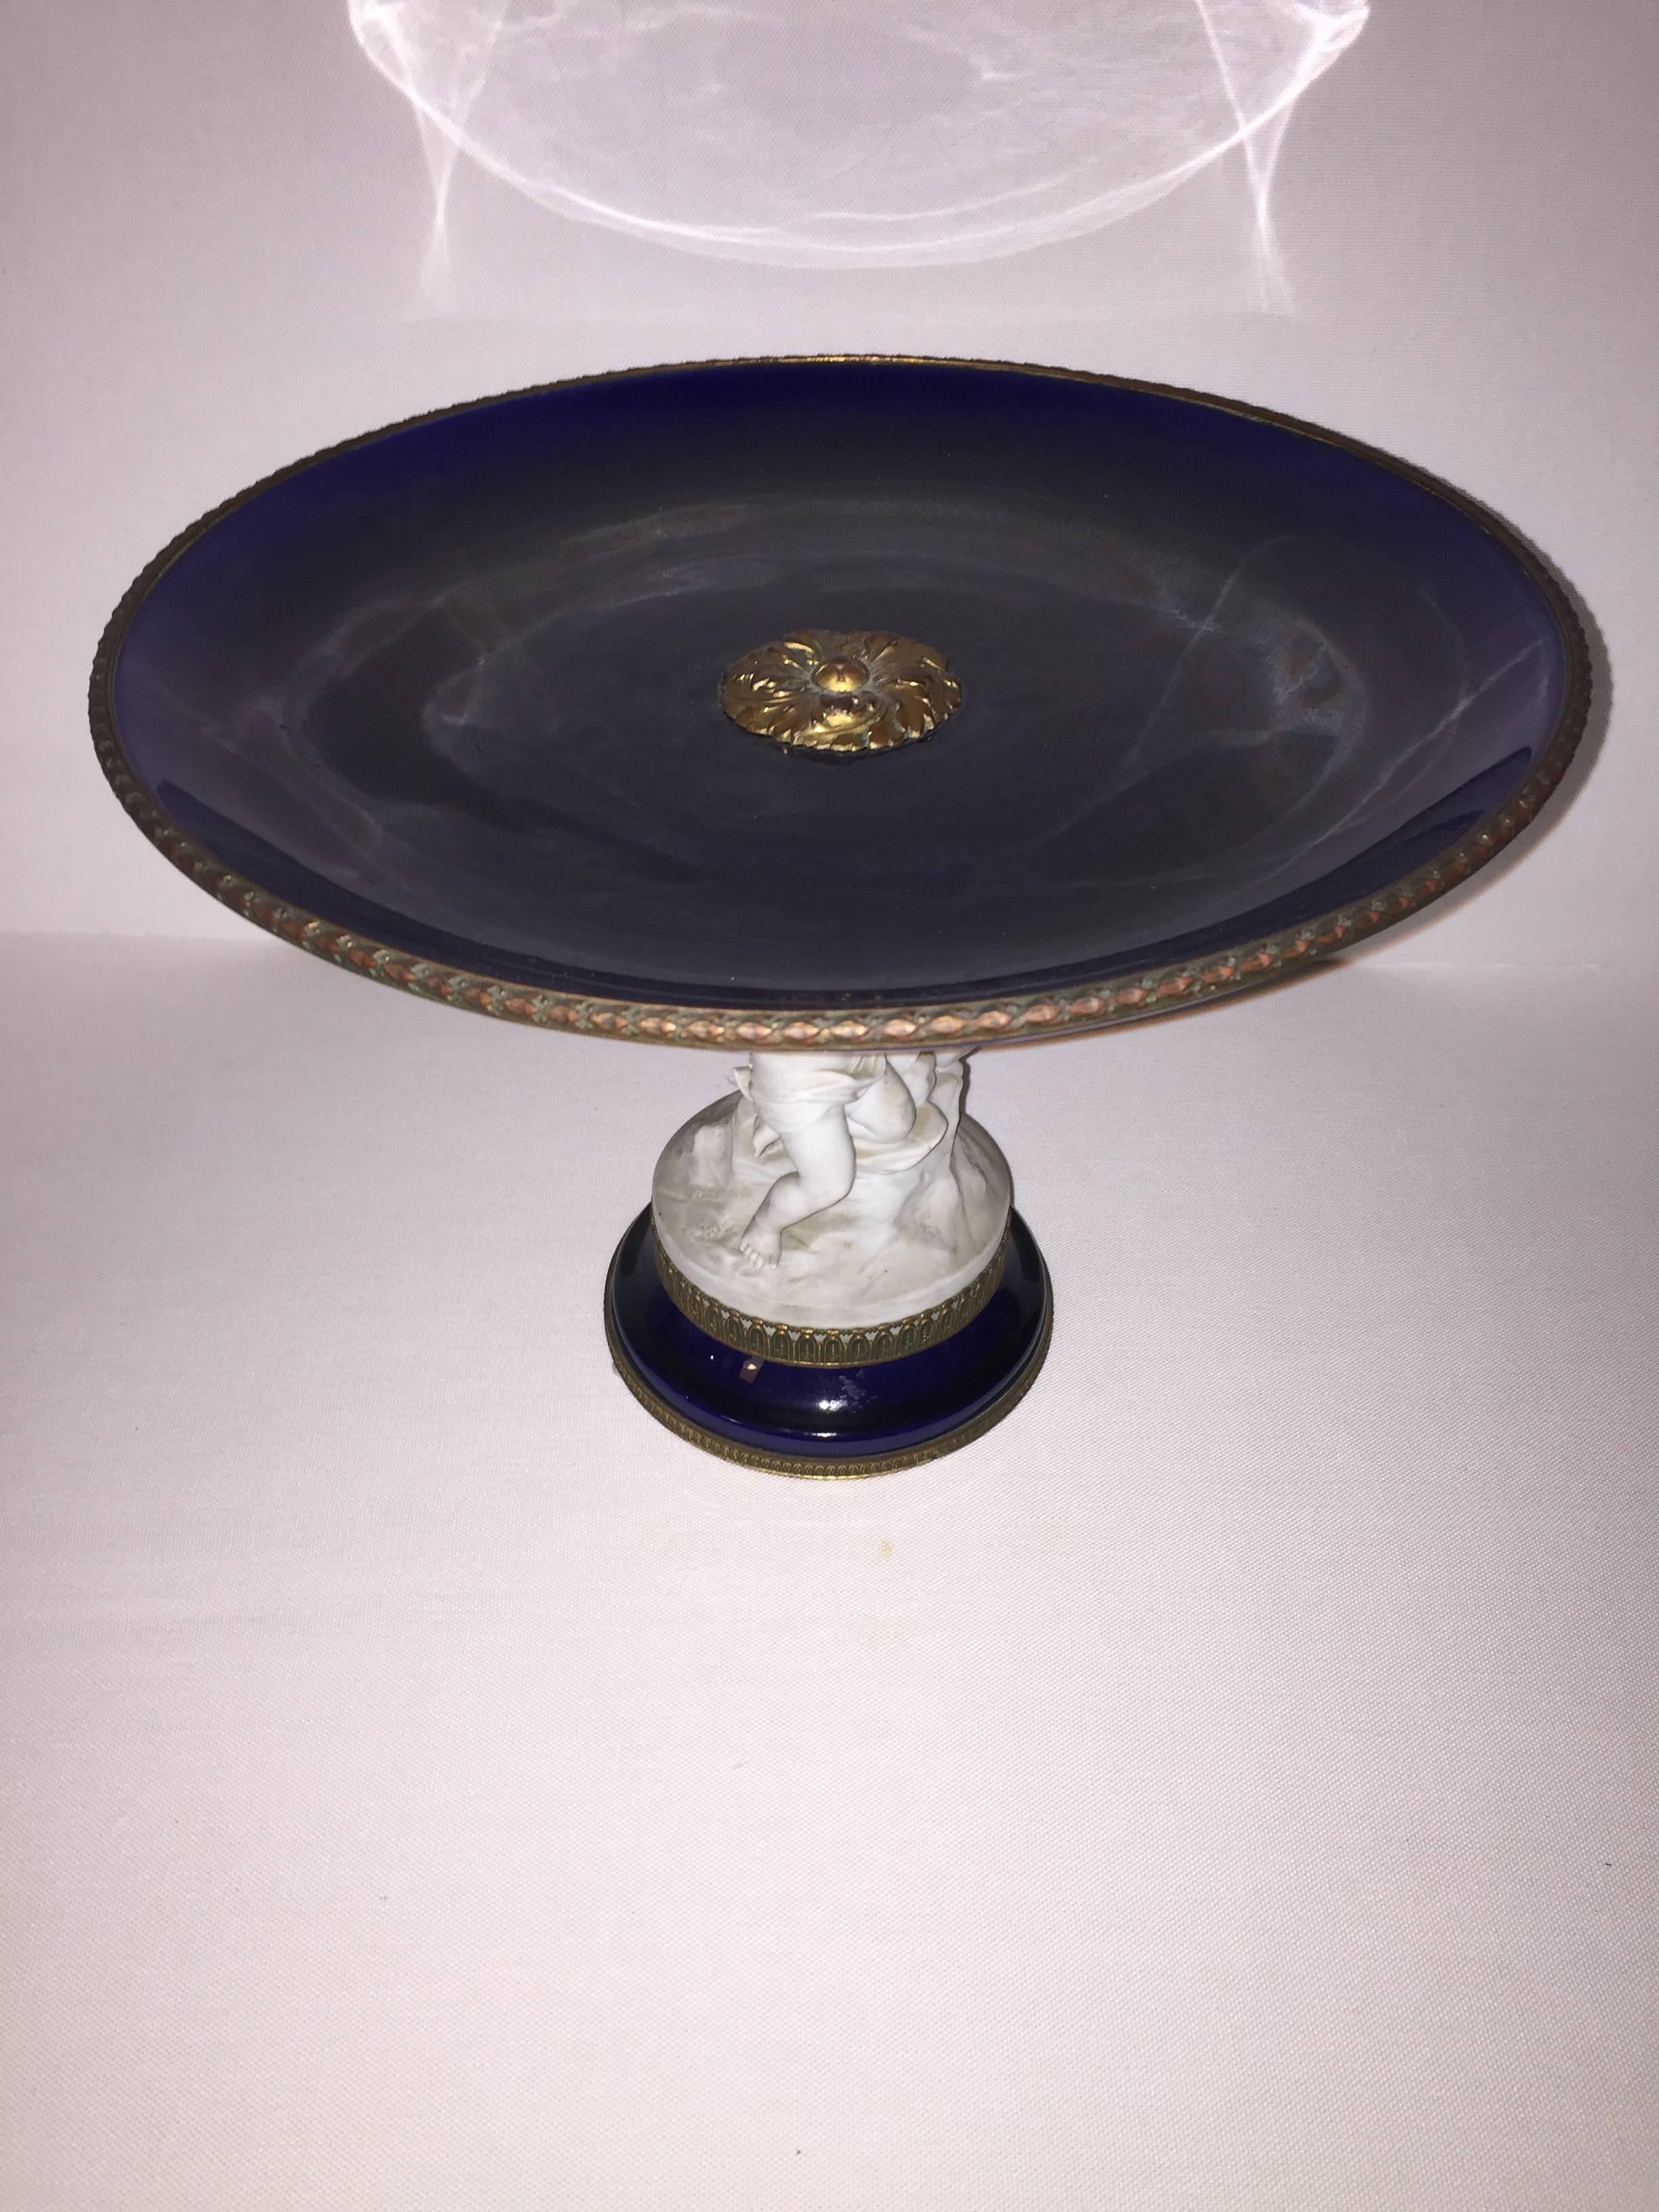 Beautiful Early 19th Century Sèvres Porcelain Centerpiece In Excellent Condition For Sale In Venice-Lido, IT